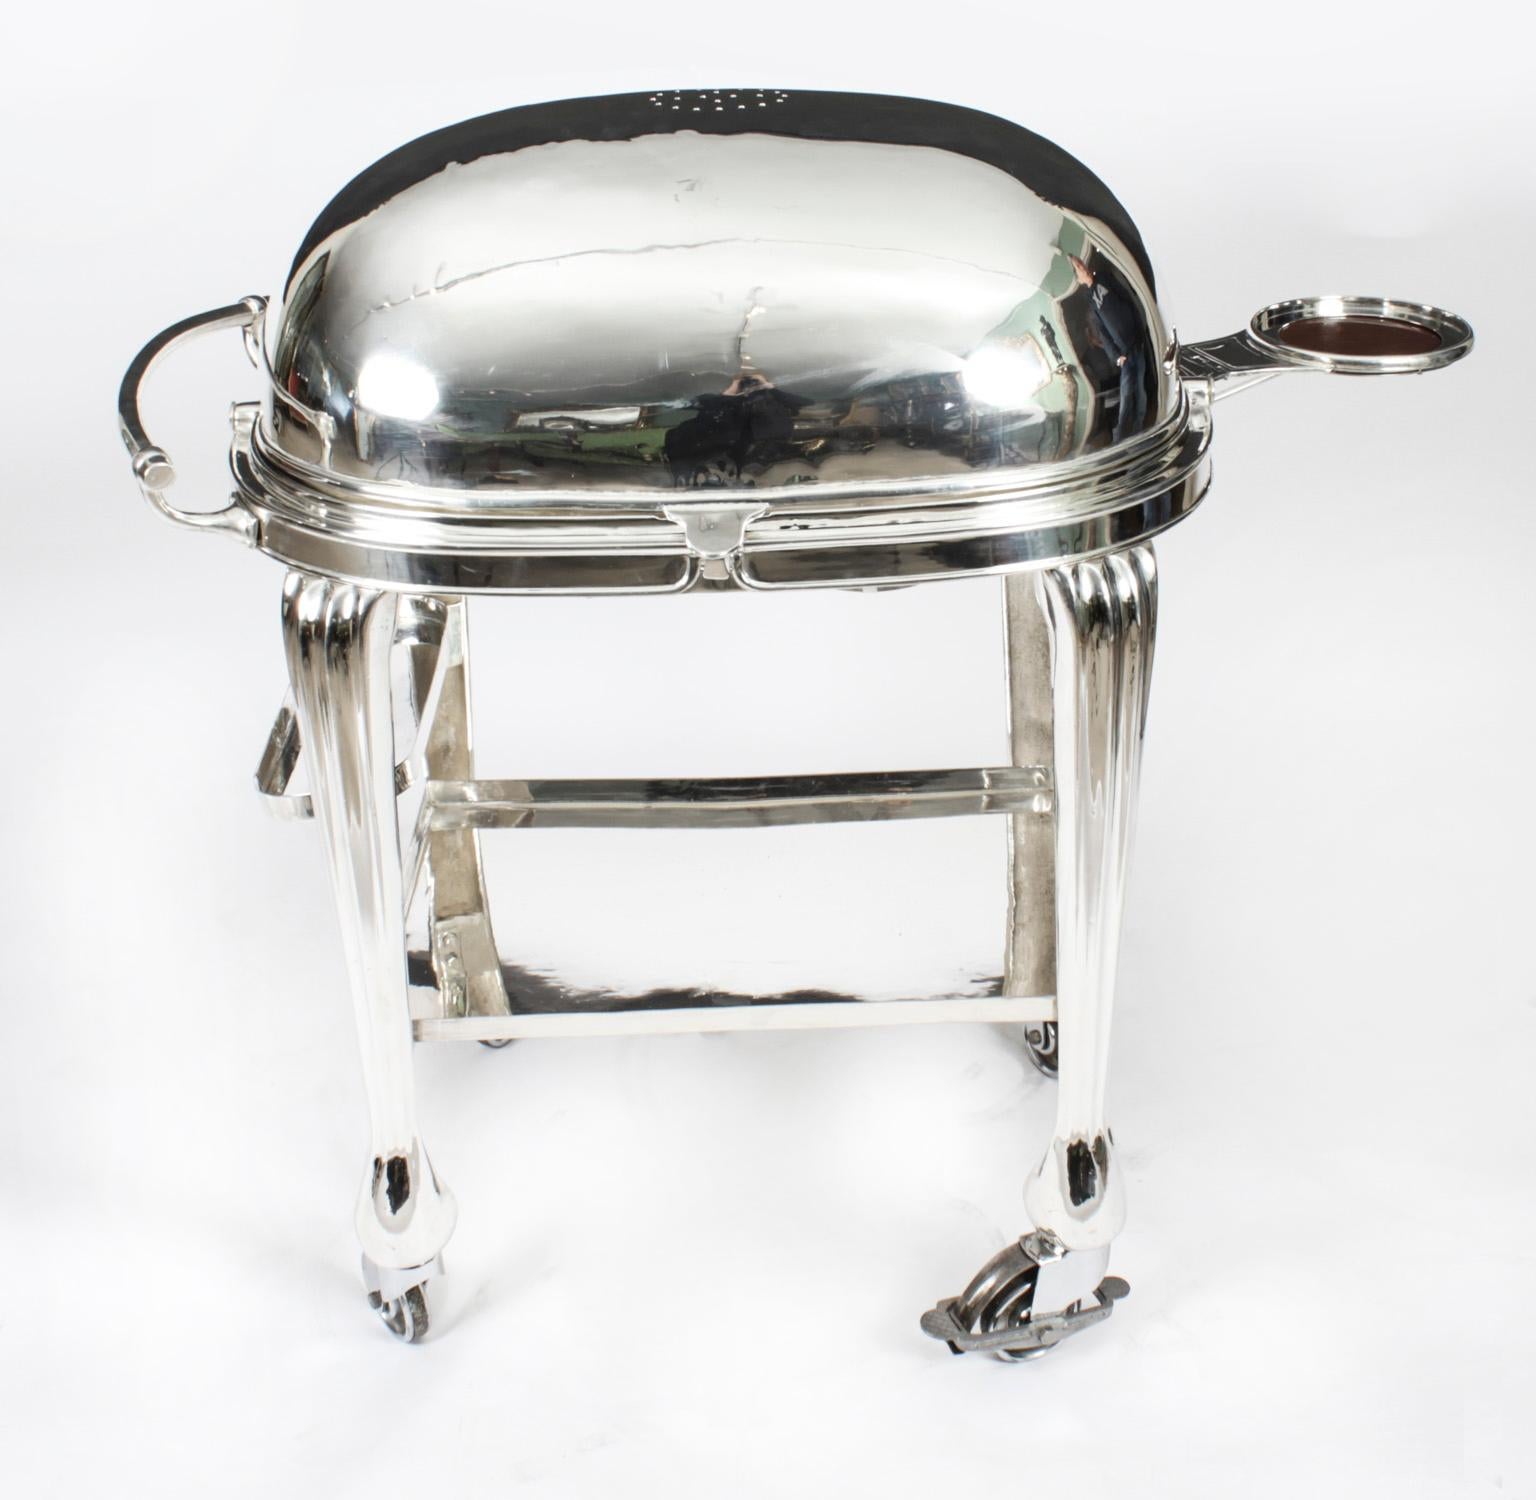 A magnificent and rare fully restored large antique Art Deco silver plated on copper serving trolley, by the renowned silversmith Elkington, circa 1930 in date. 
 
Serve your roast beef in style!!
 
This stunning trolley is suitable for serving